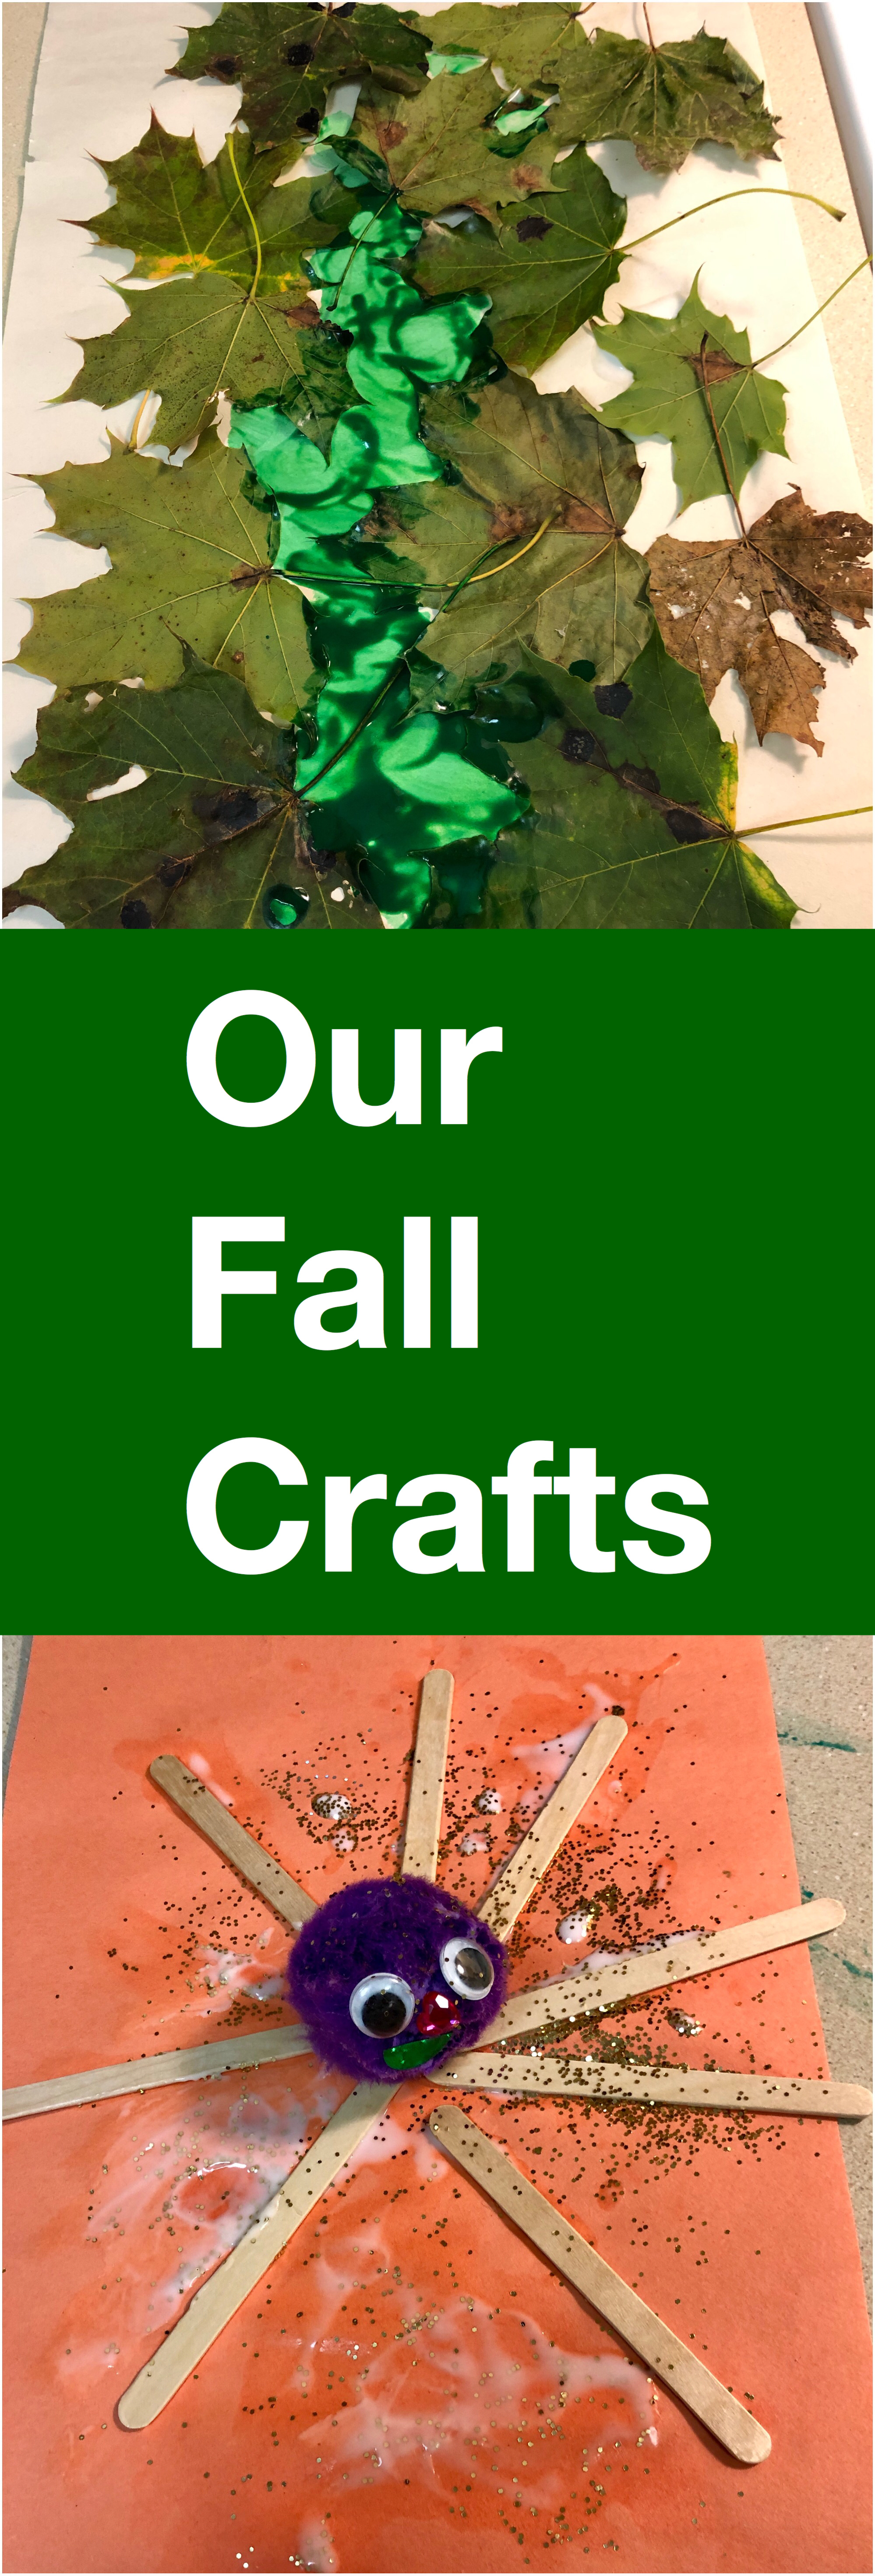 Our fall crafts pin